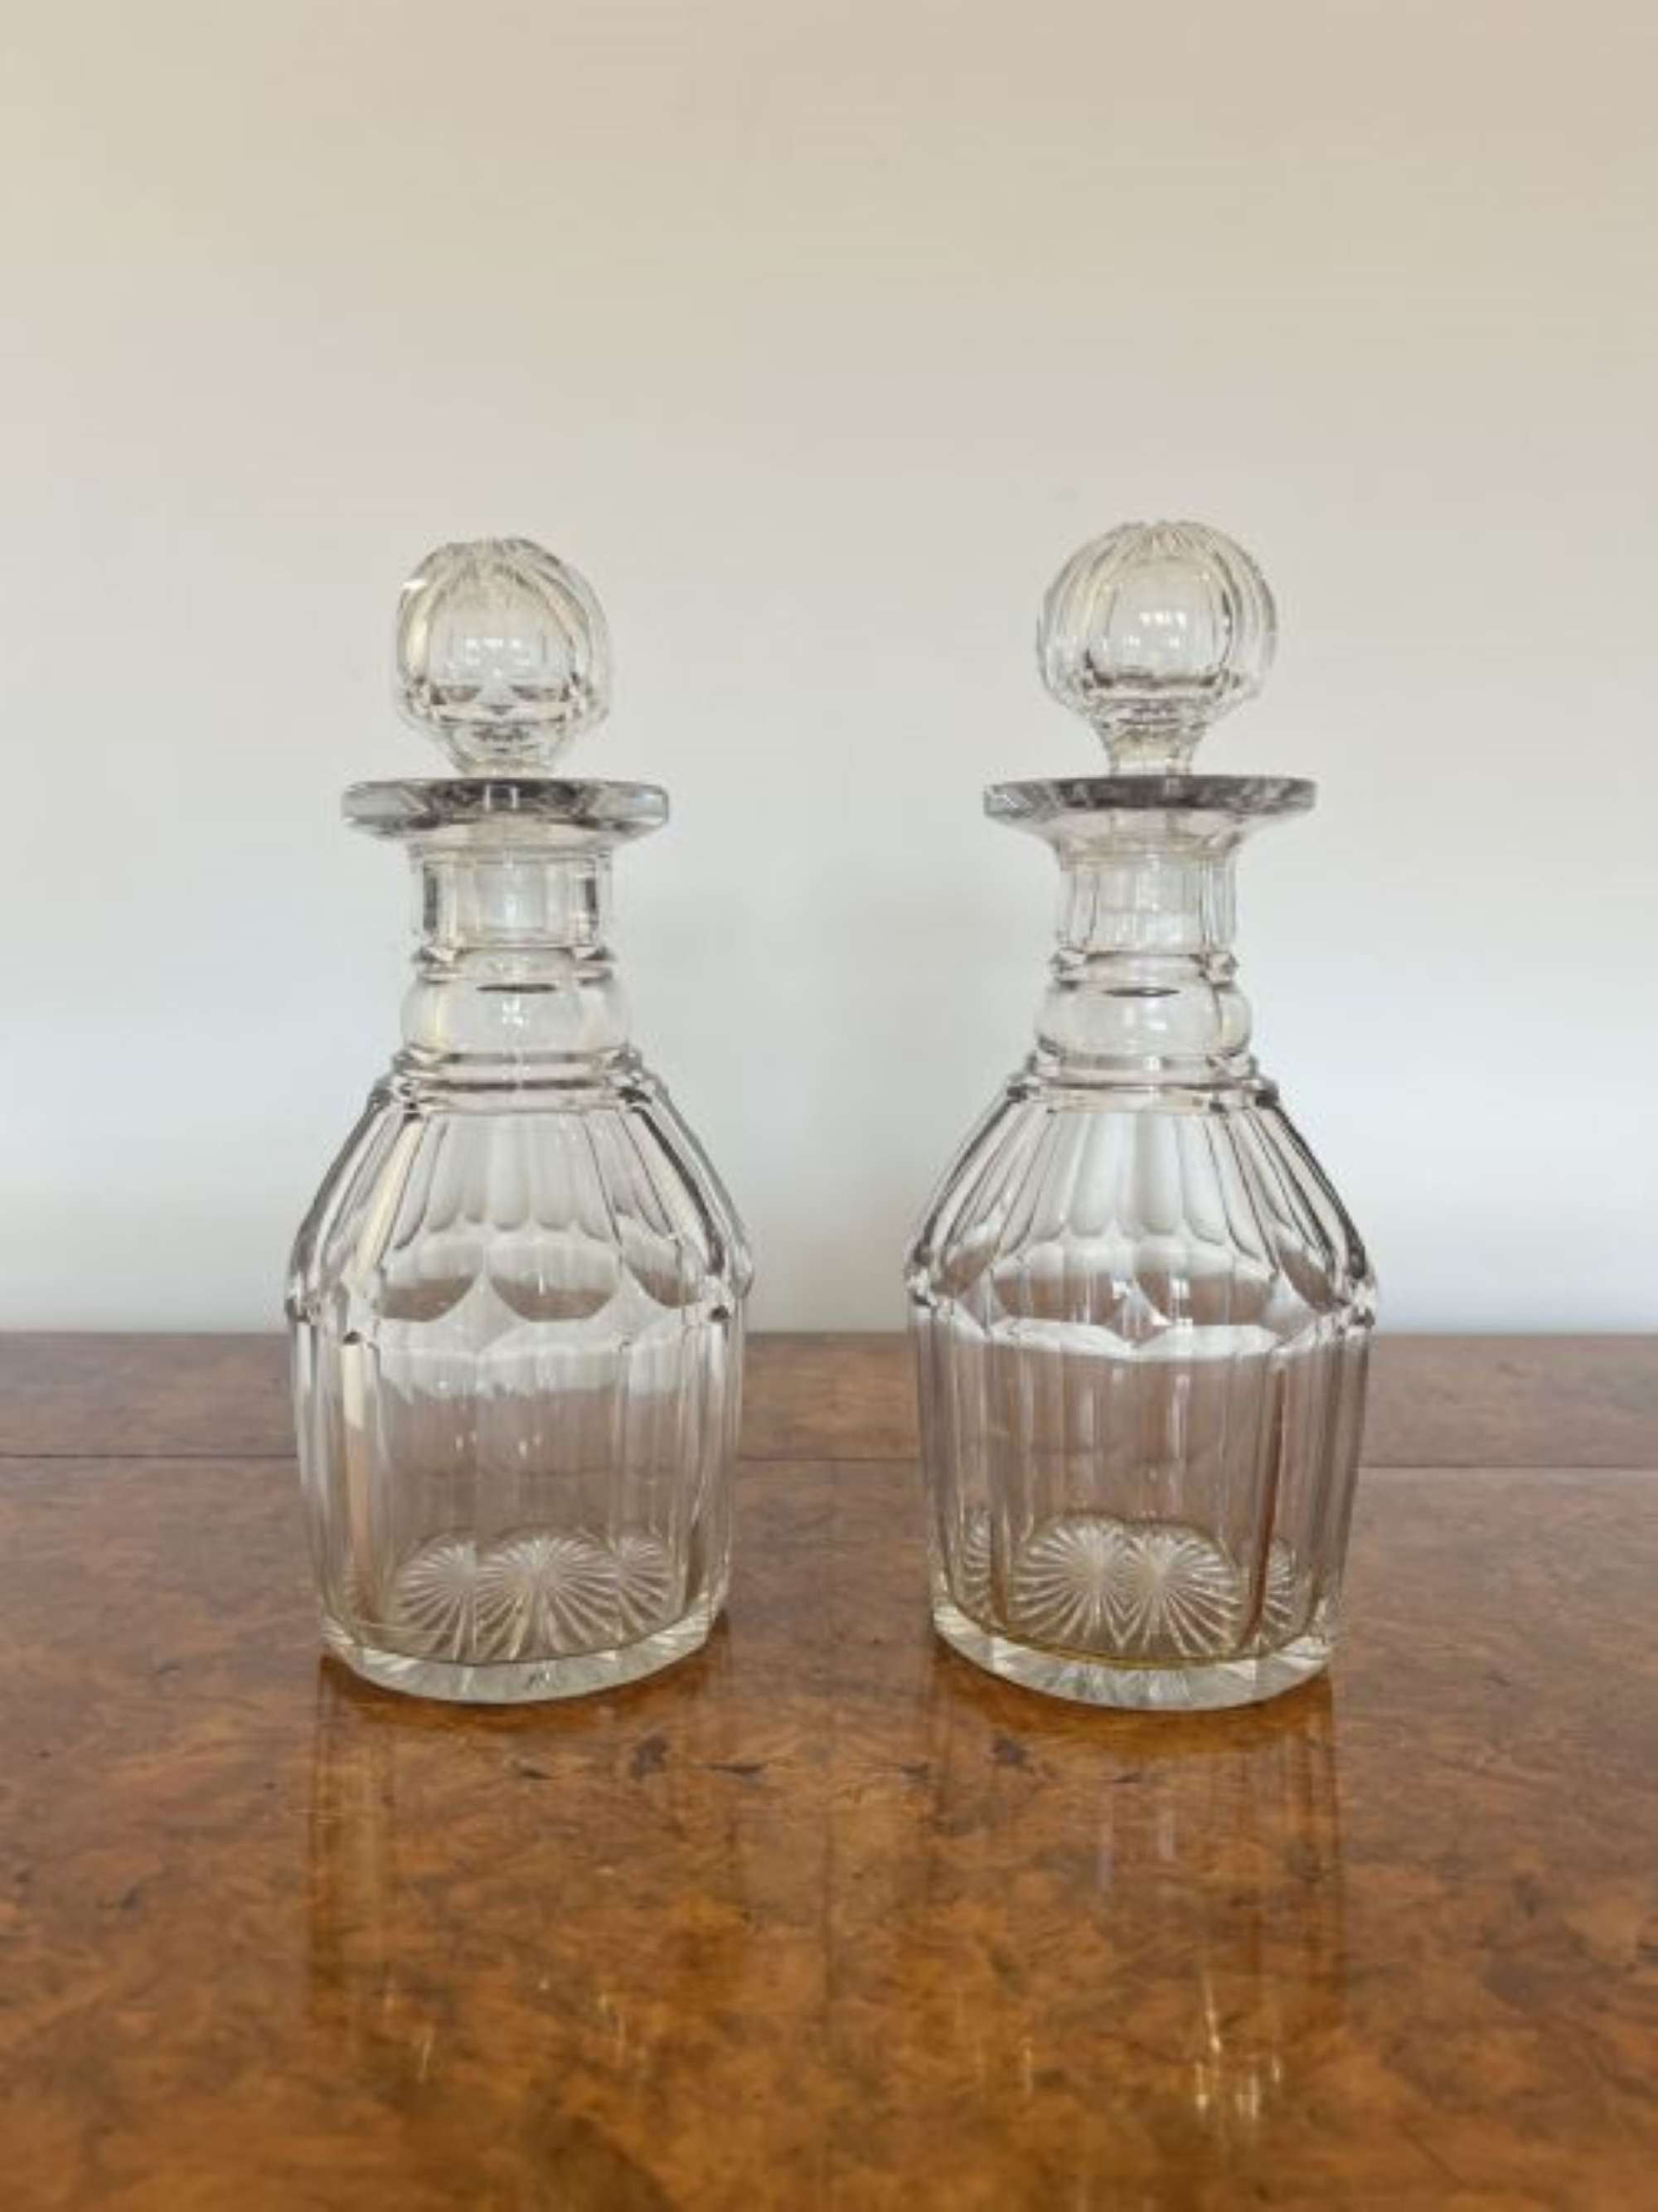 Quality pair of antique Victorian decanters